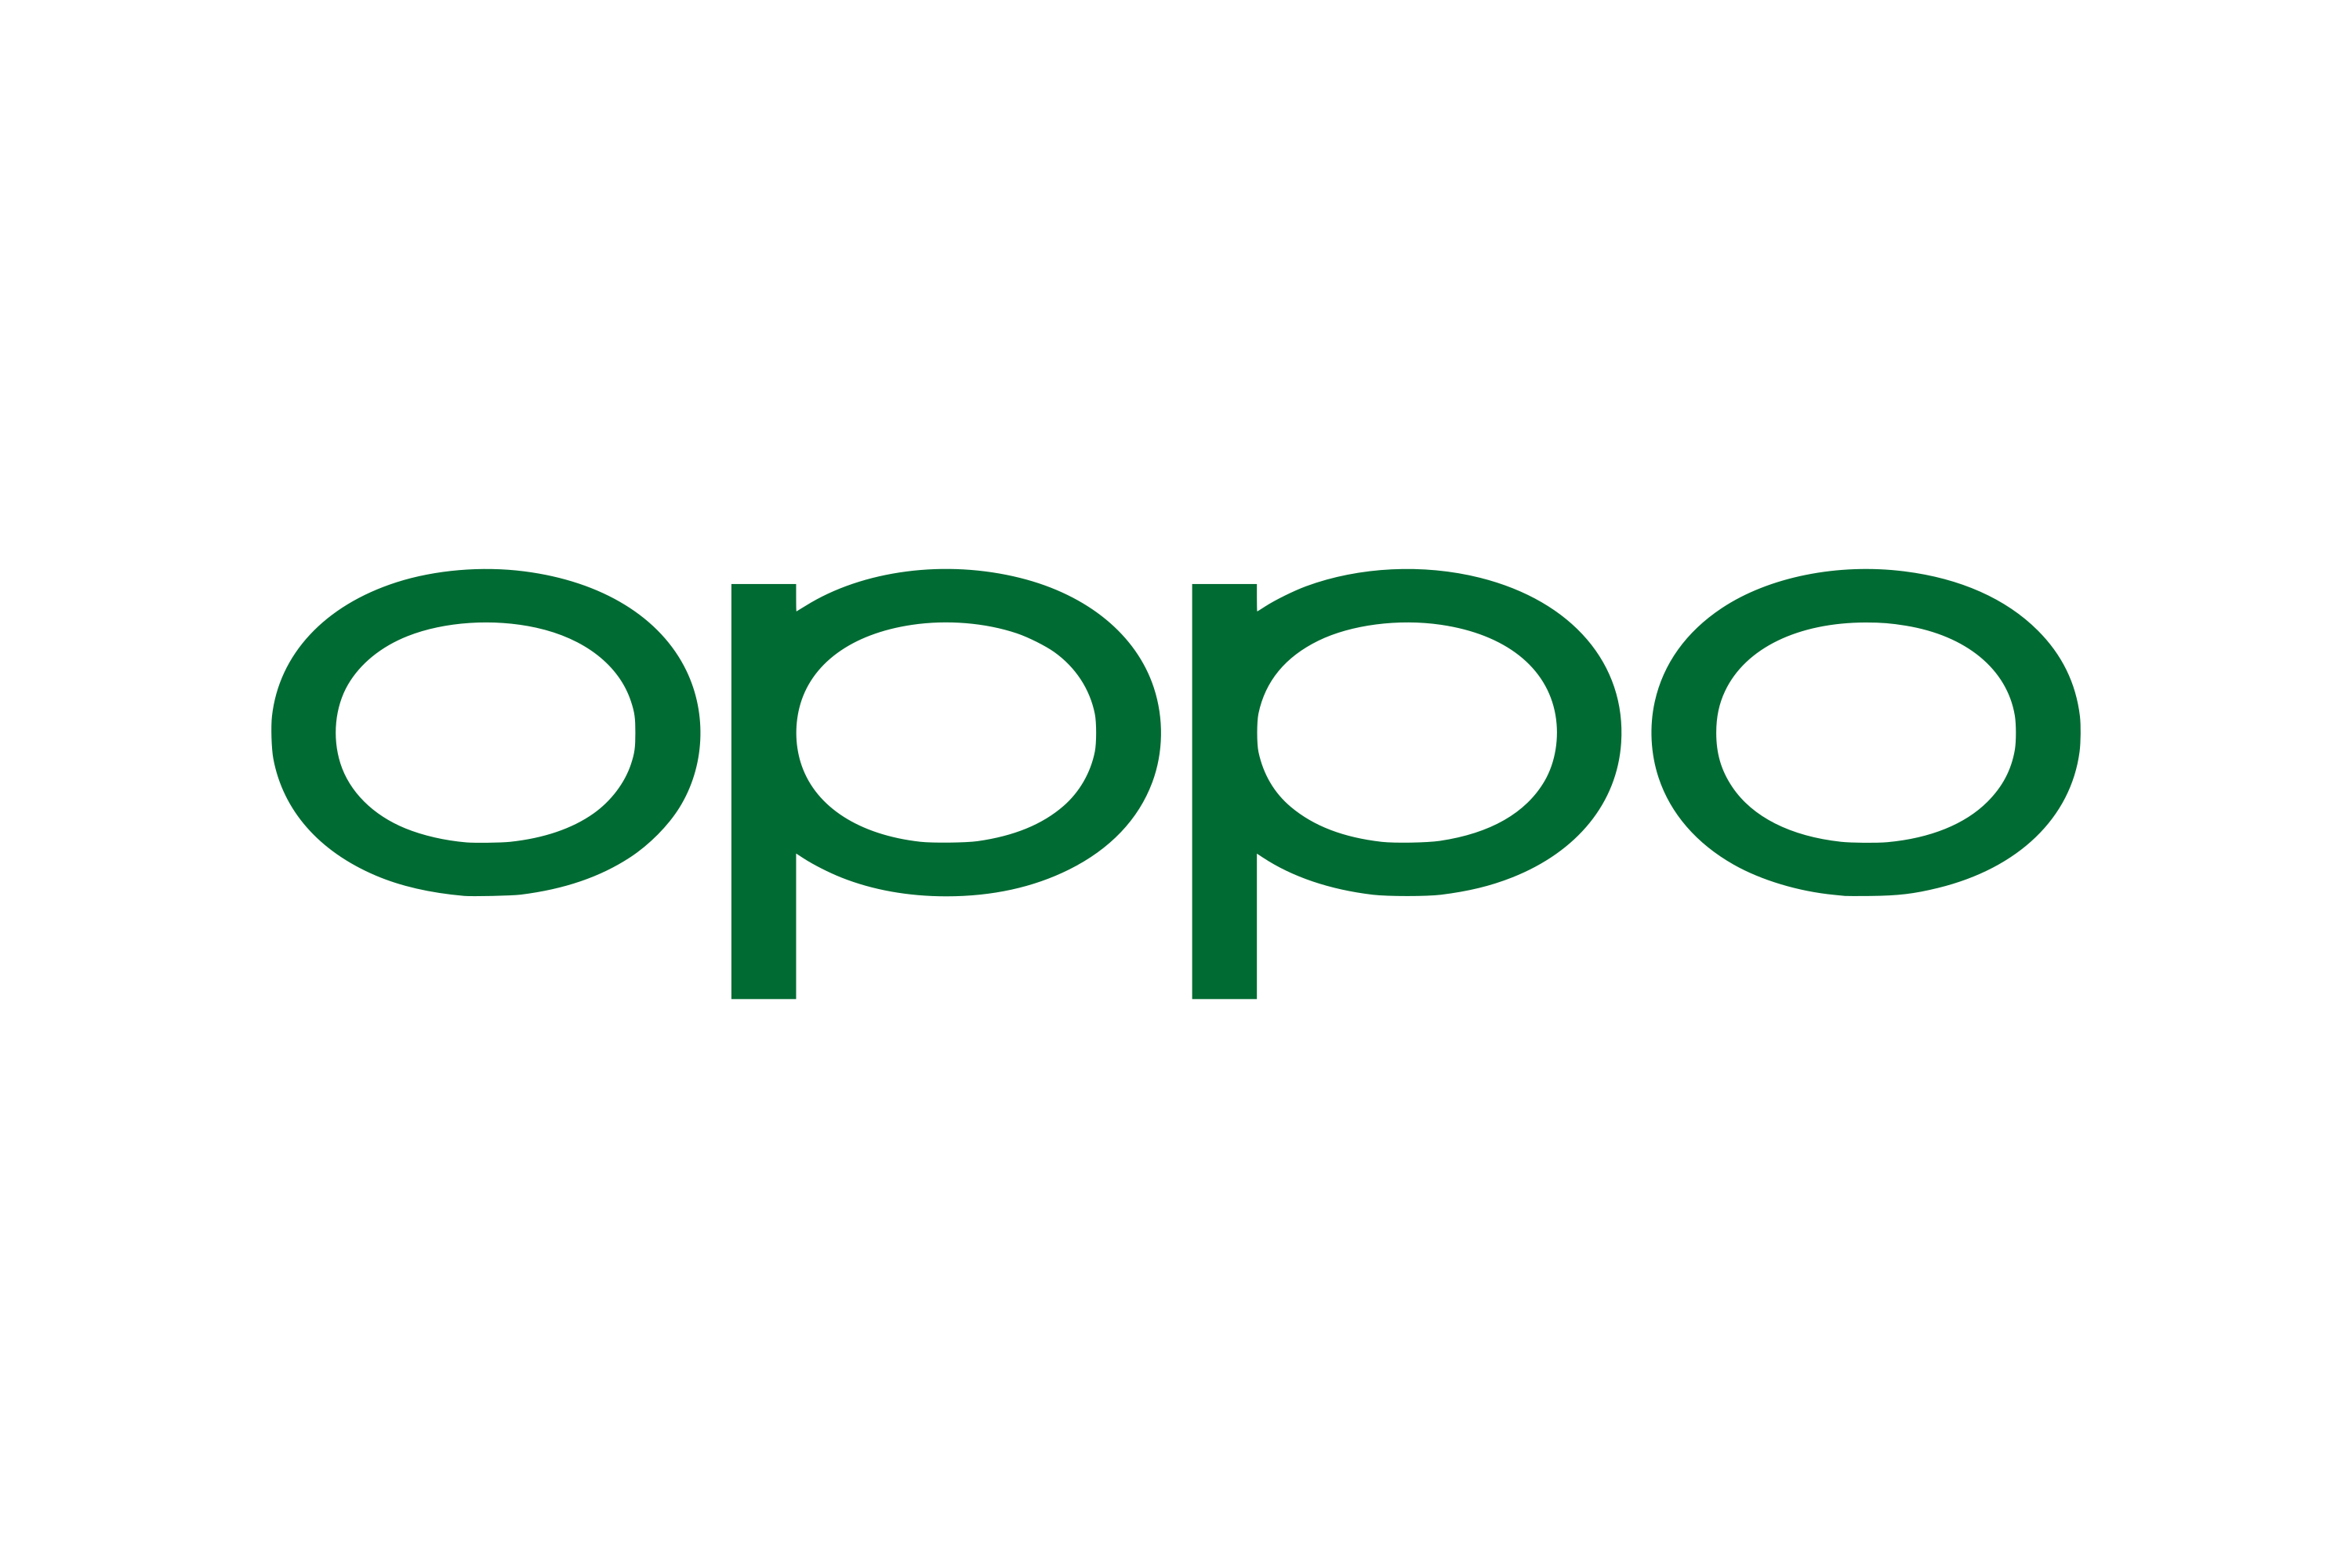 Download Oppo Logo In Svg Vector Or Png File Format   Logo.wine - Oppo, Transparent background PNG HD thumbnail